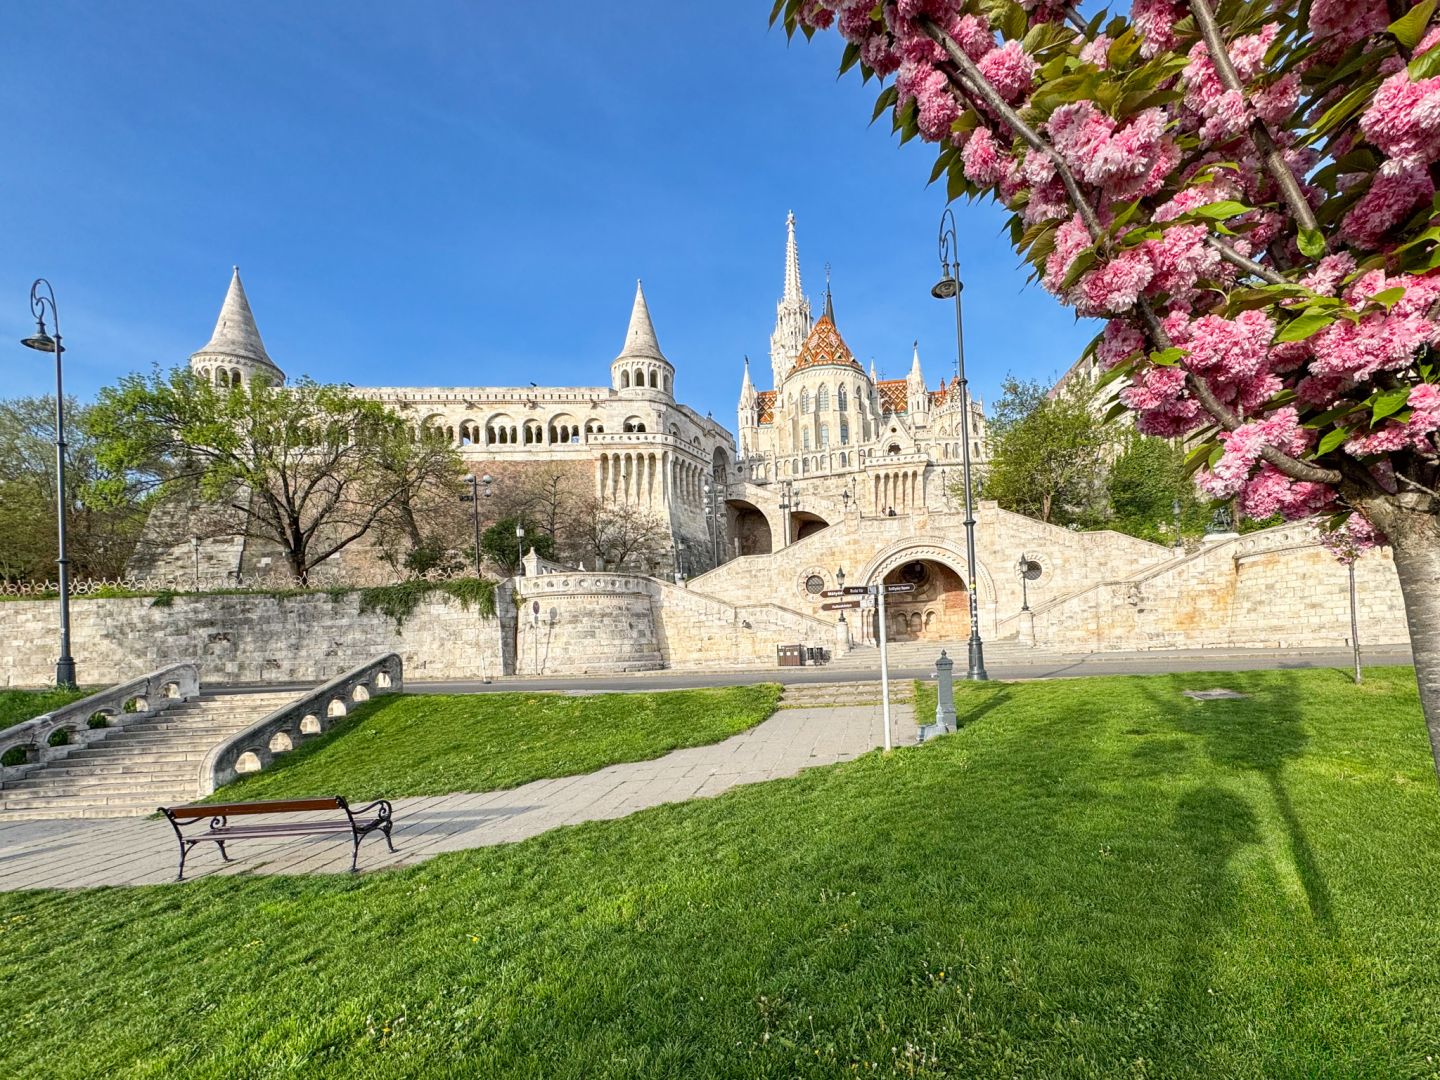 Fisherman's Bastion framed by blooming cherry trees.